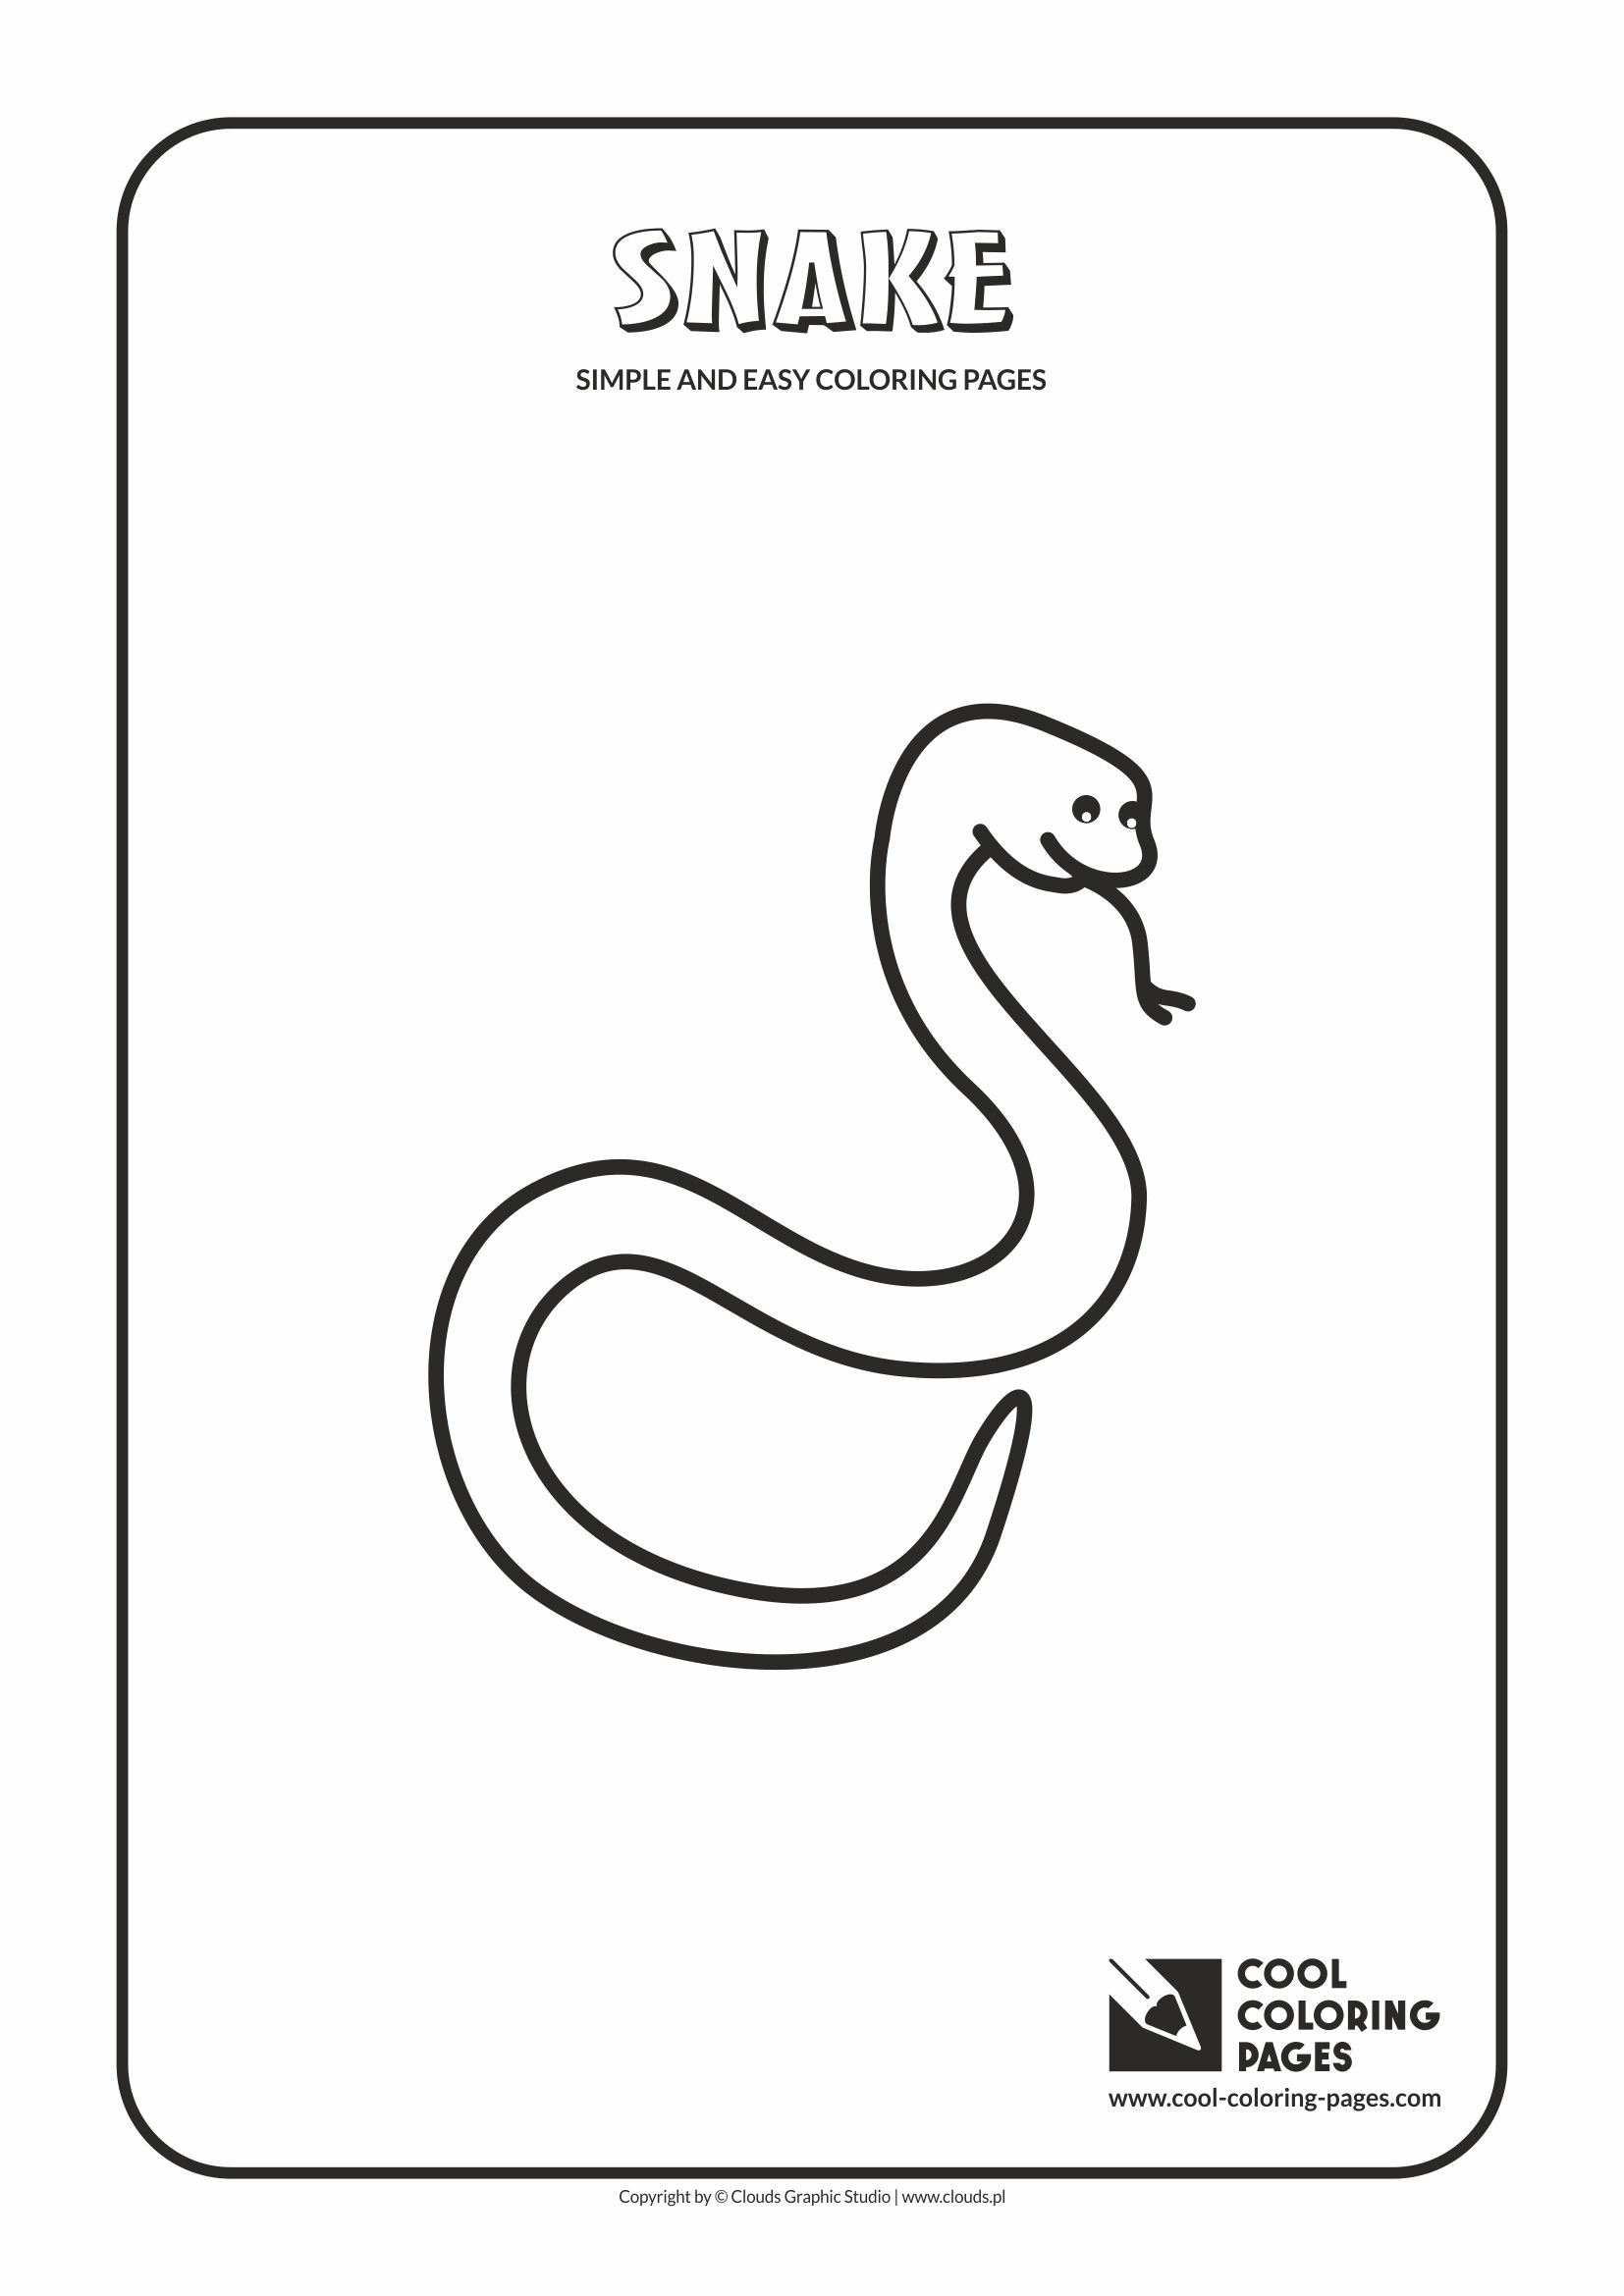 Simple and easy coloring pages for toddlers - Snake